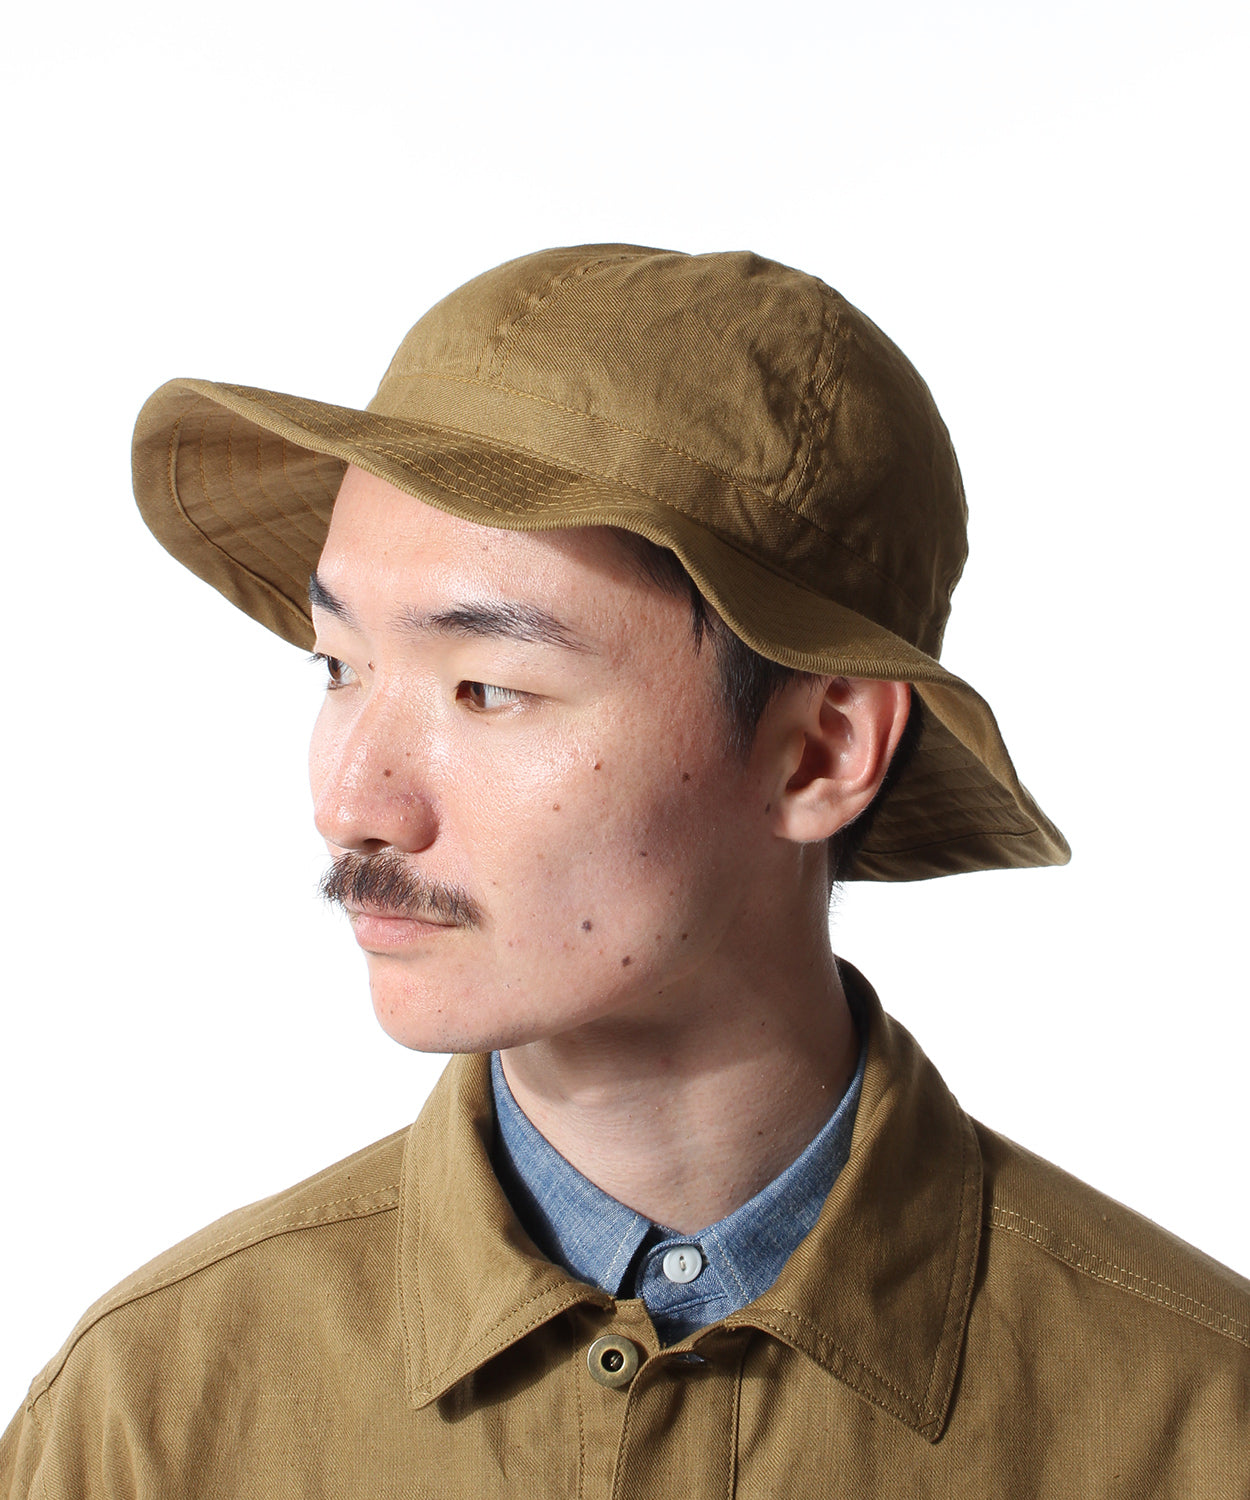 【 24SS 】ANATOMICA 1918 ARMY HAT / OLIVE DRAB